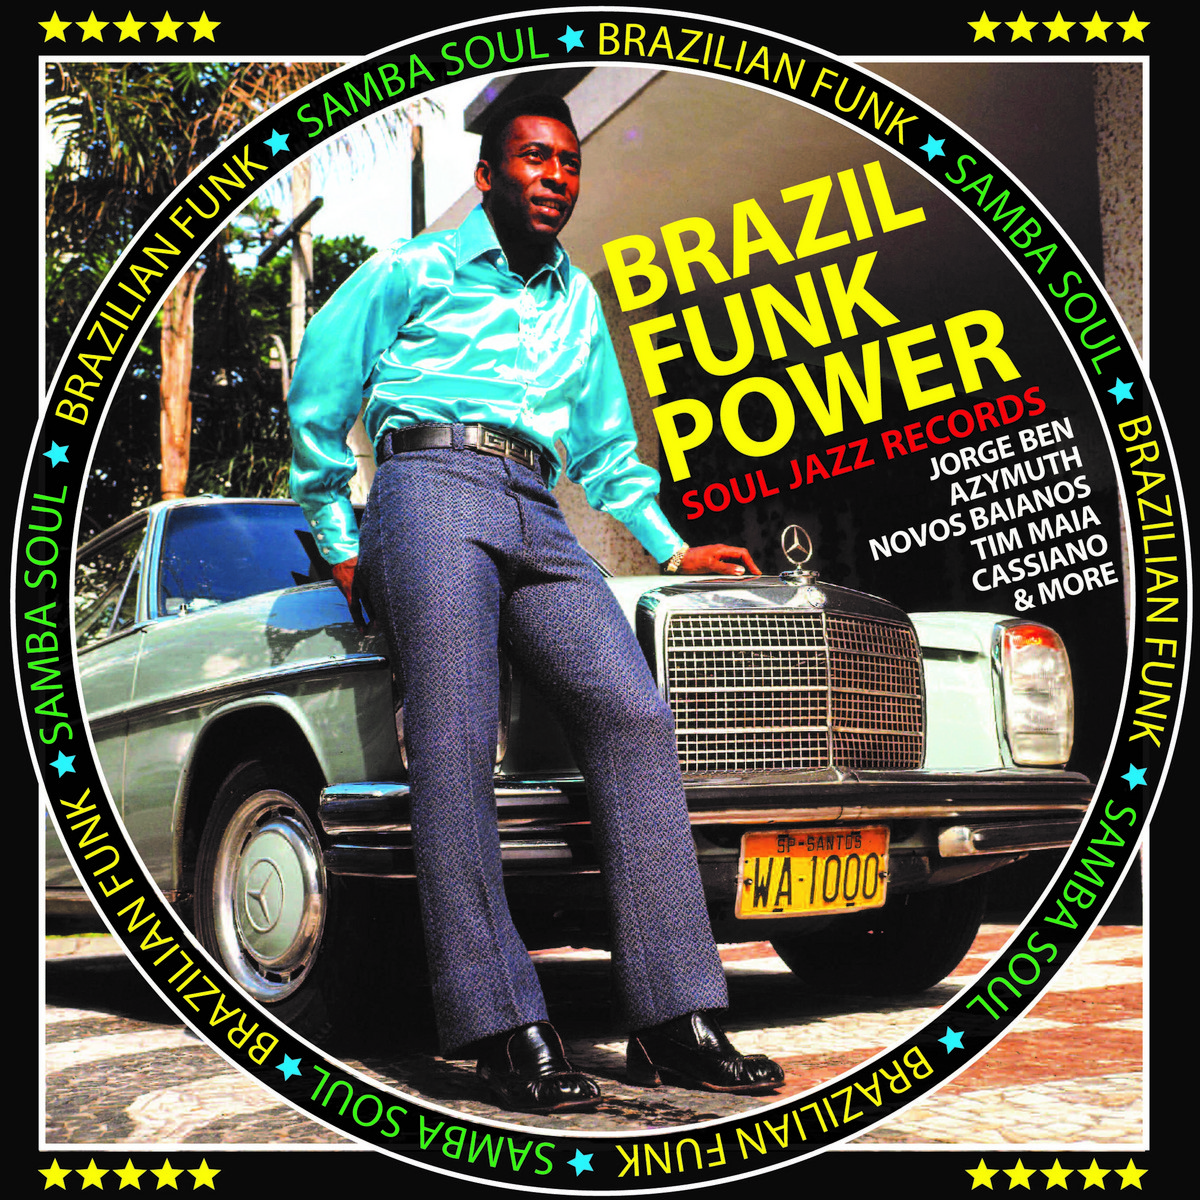 Braxil Funk Power exclusvie release for Record Store Day 2020